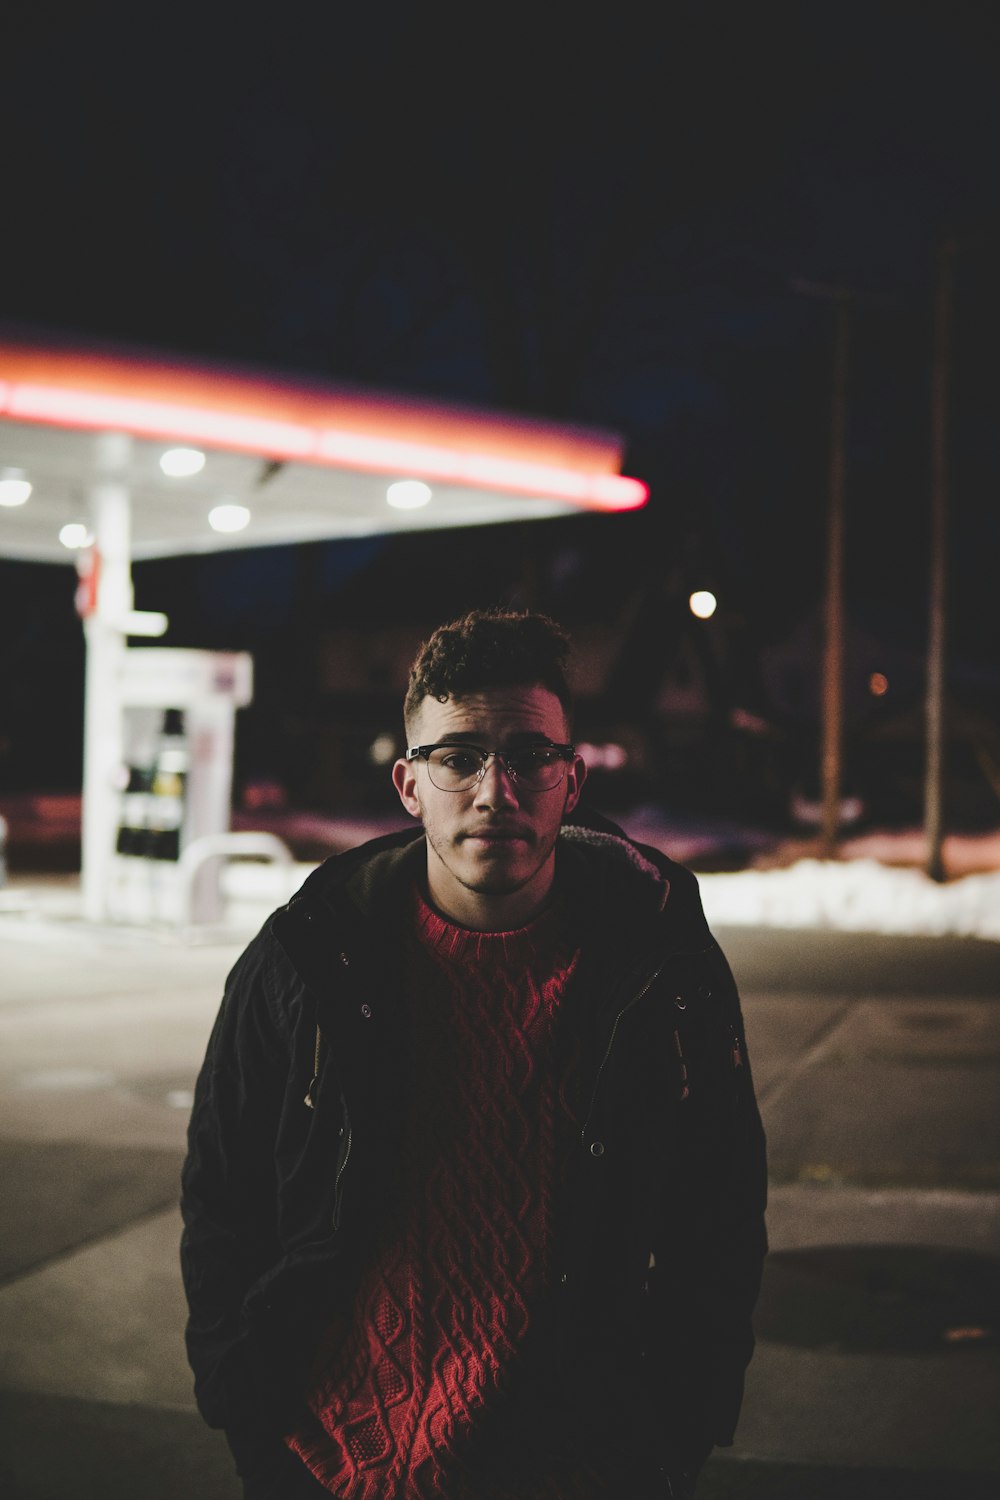 man in red shirt and black zip-up hooded jacket standing near white and red gas station at night